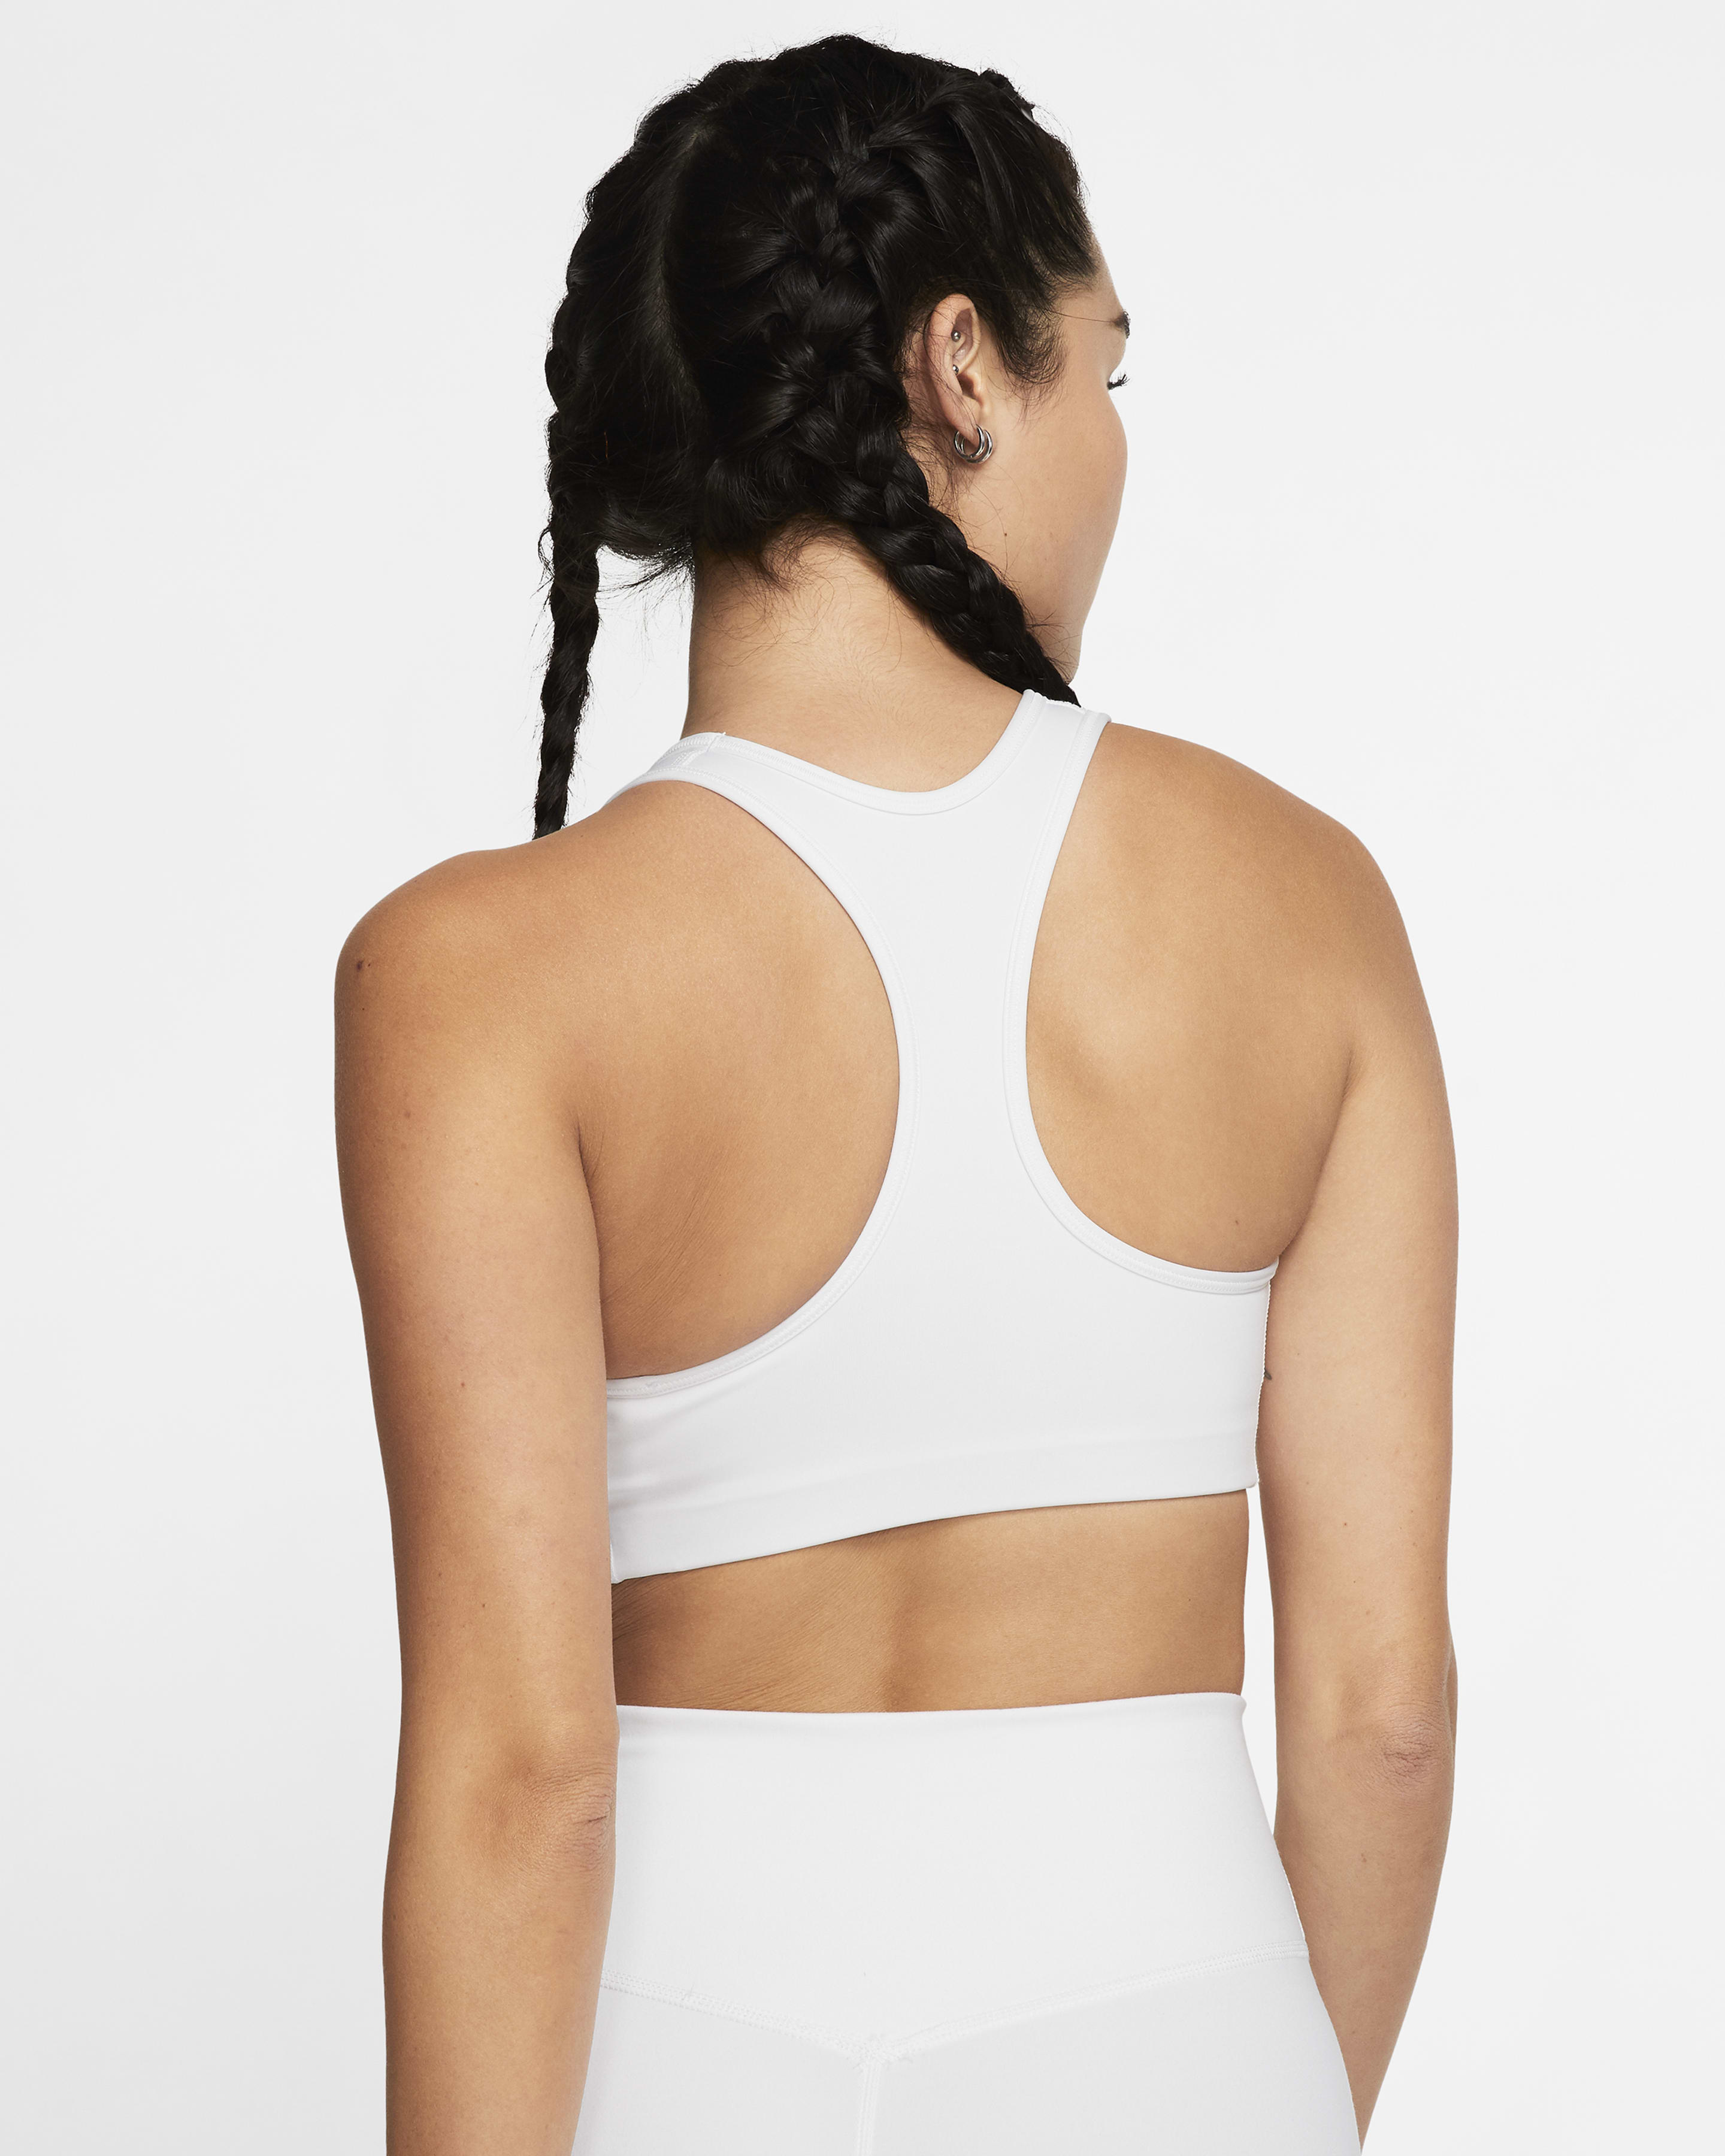 M&S NON WIRED FRONT FASTENING FULL CUP BRALETTE WHITE 30C